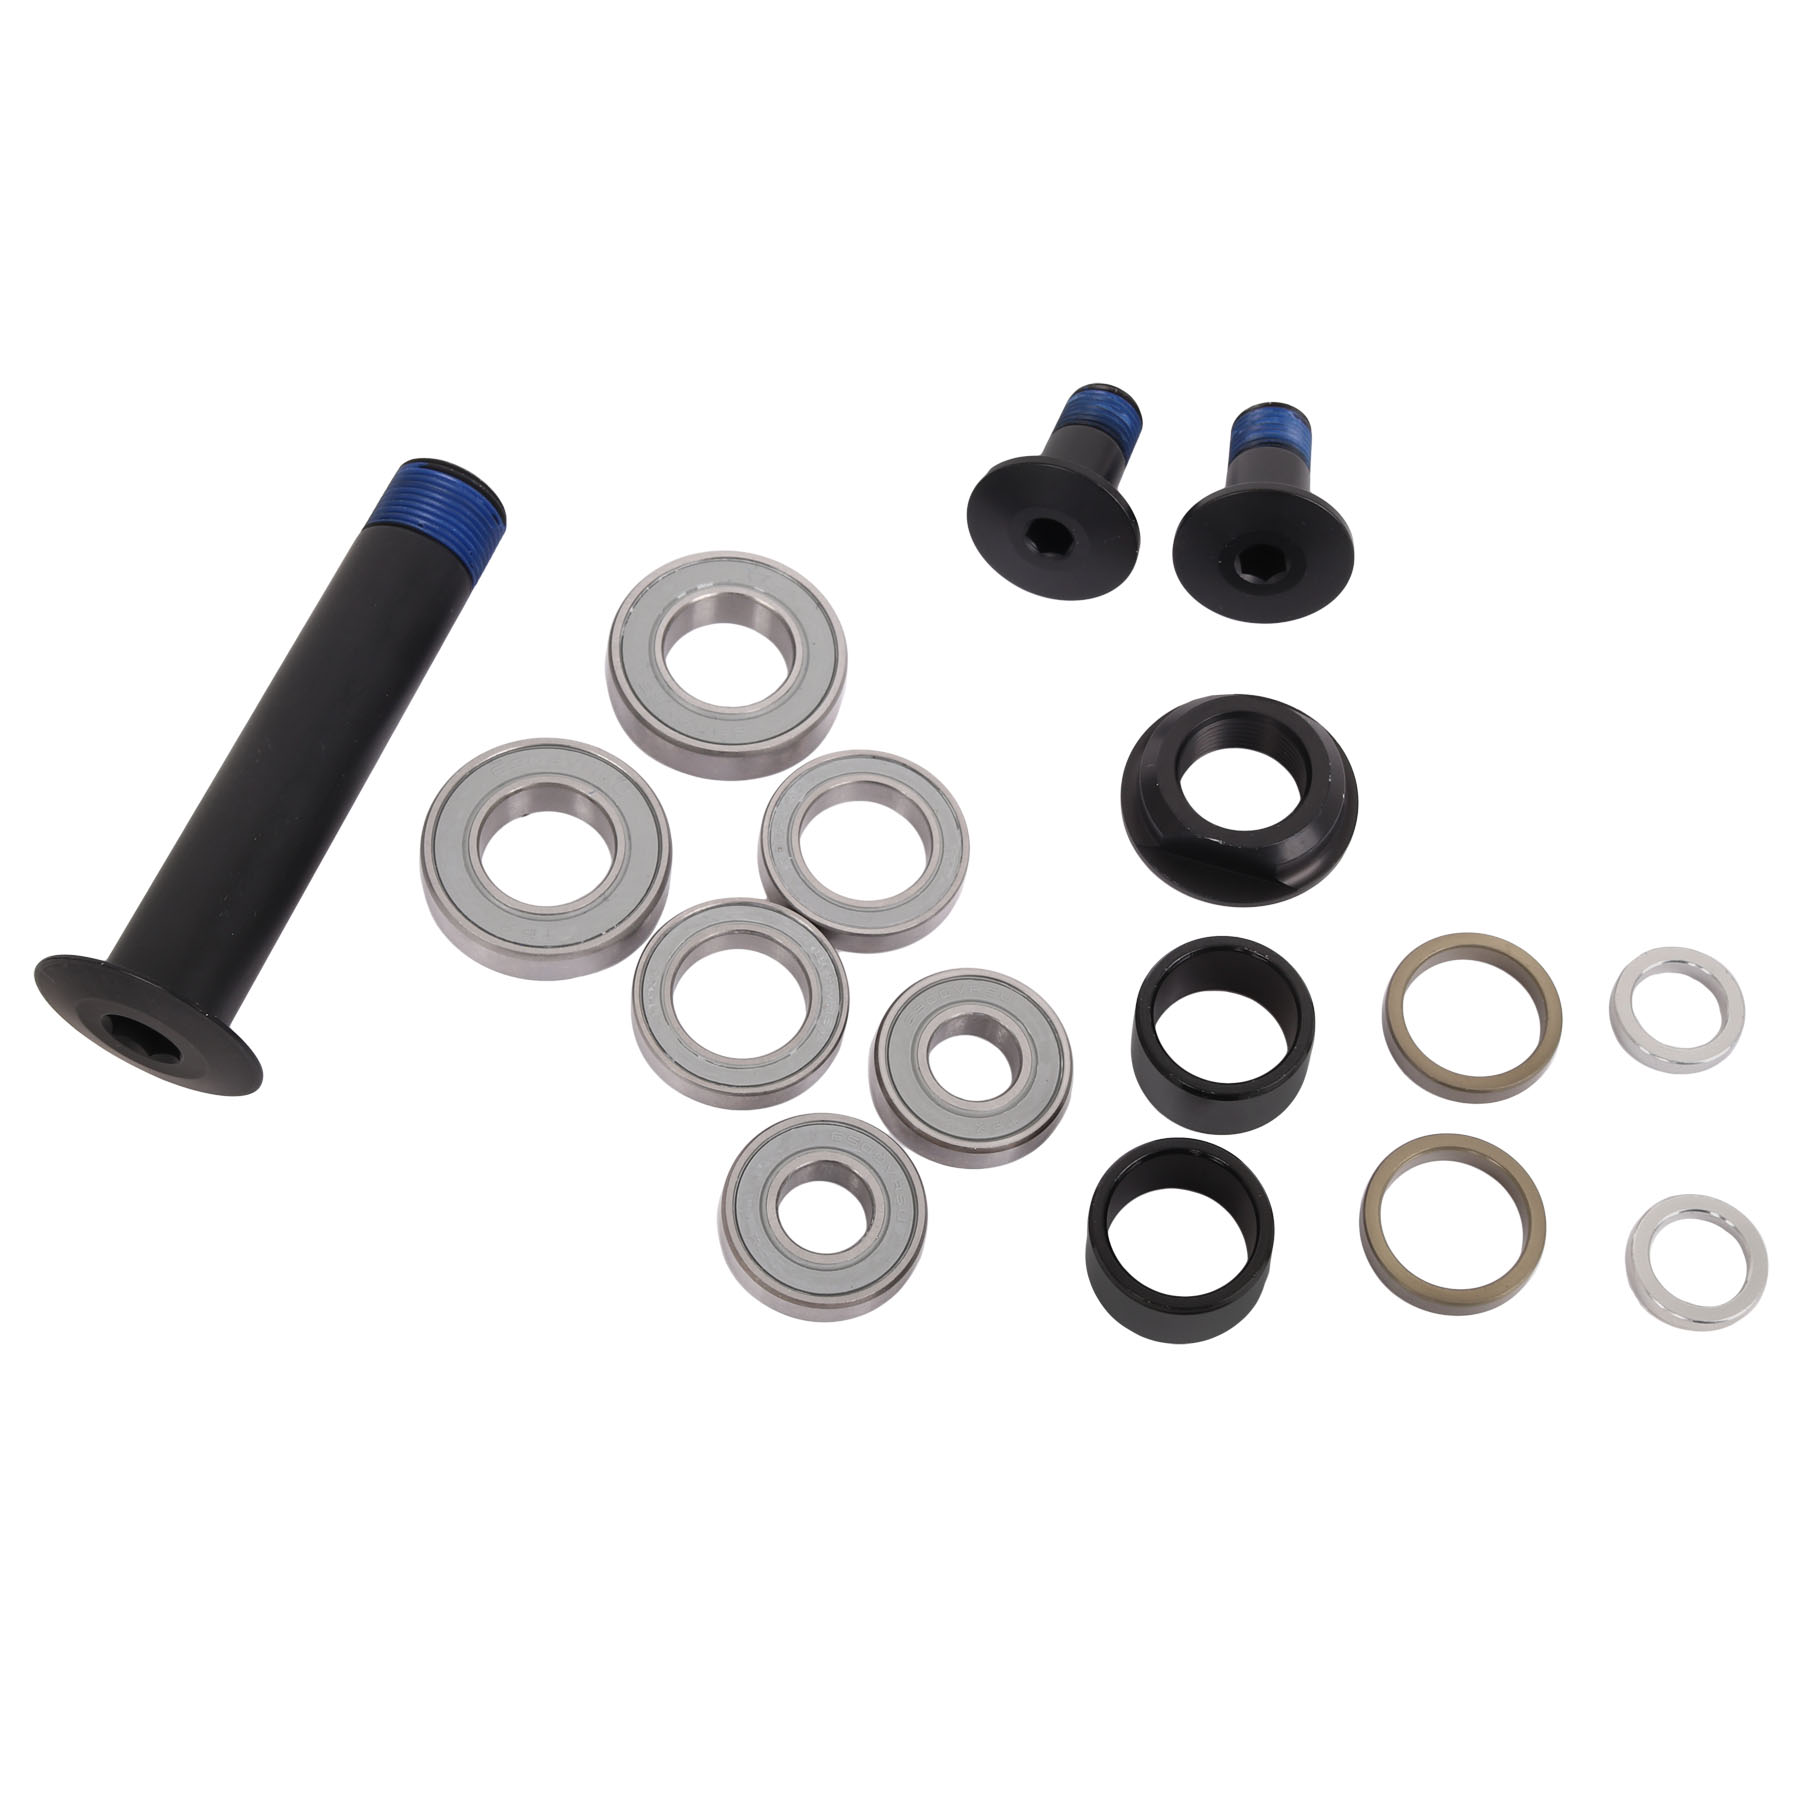 Picture of Giant GSF032 Rear Shock Accessories for Stance / Embolden | Frame Bolt Kit - 1280GSF03205A1